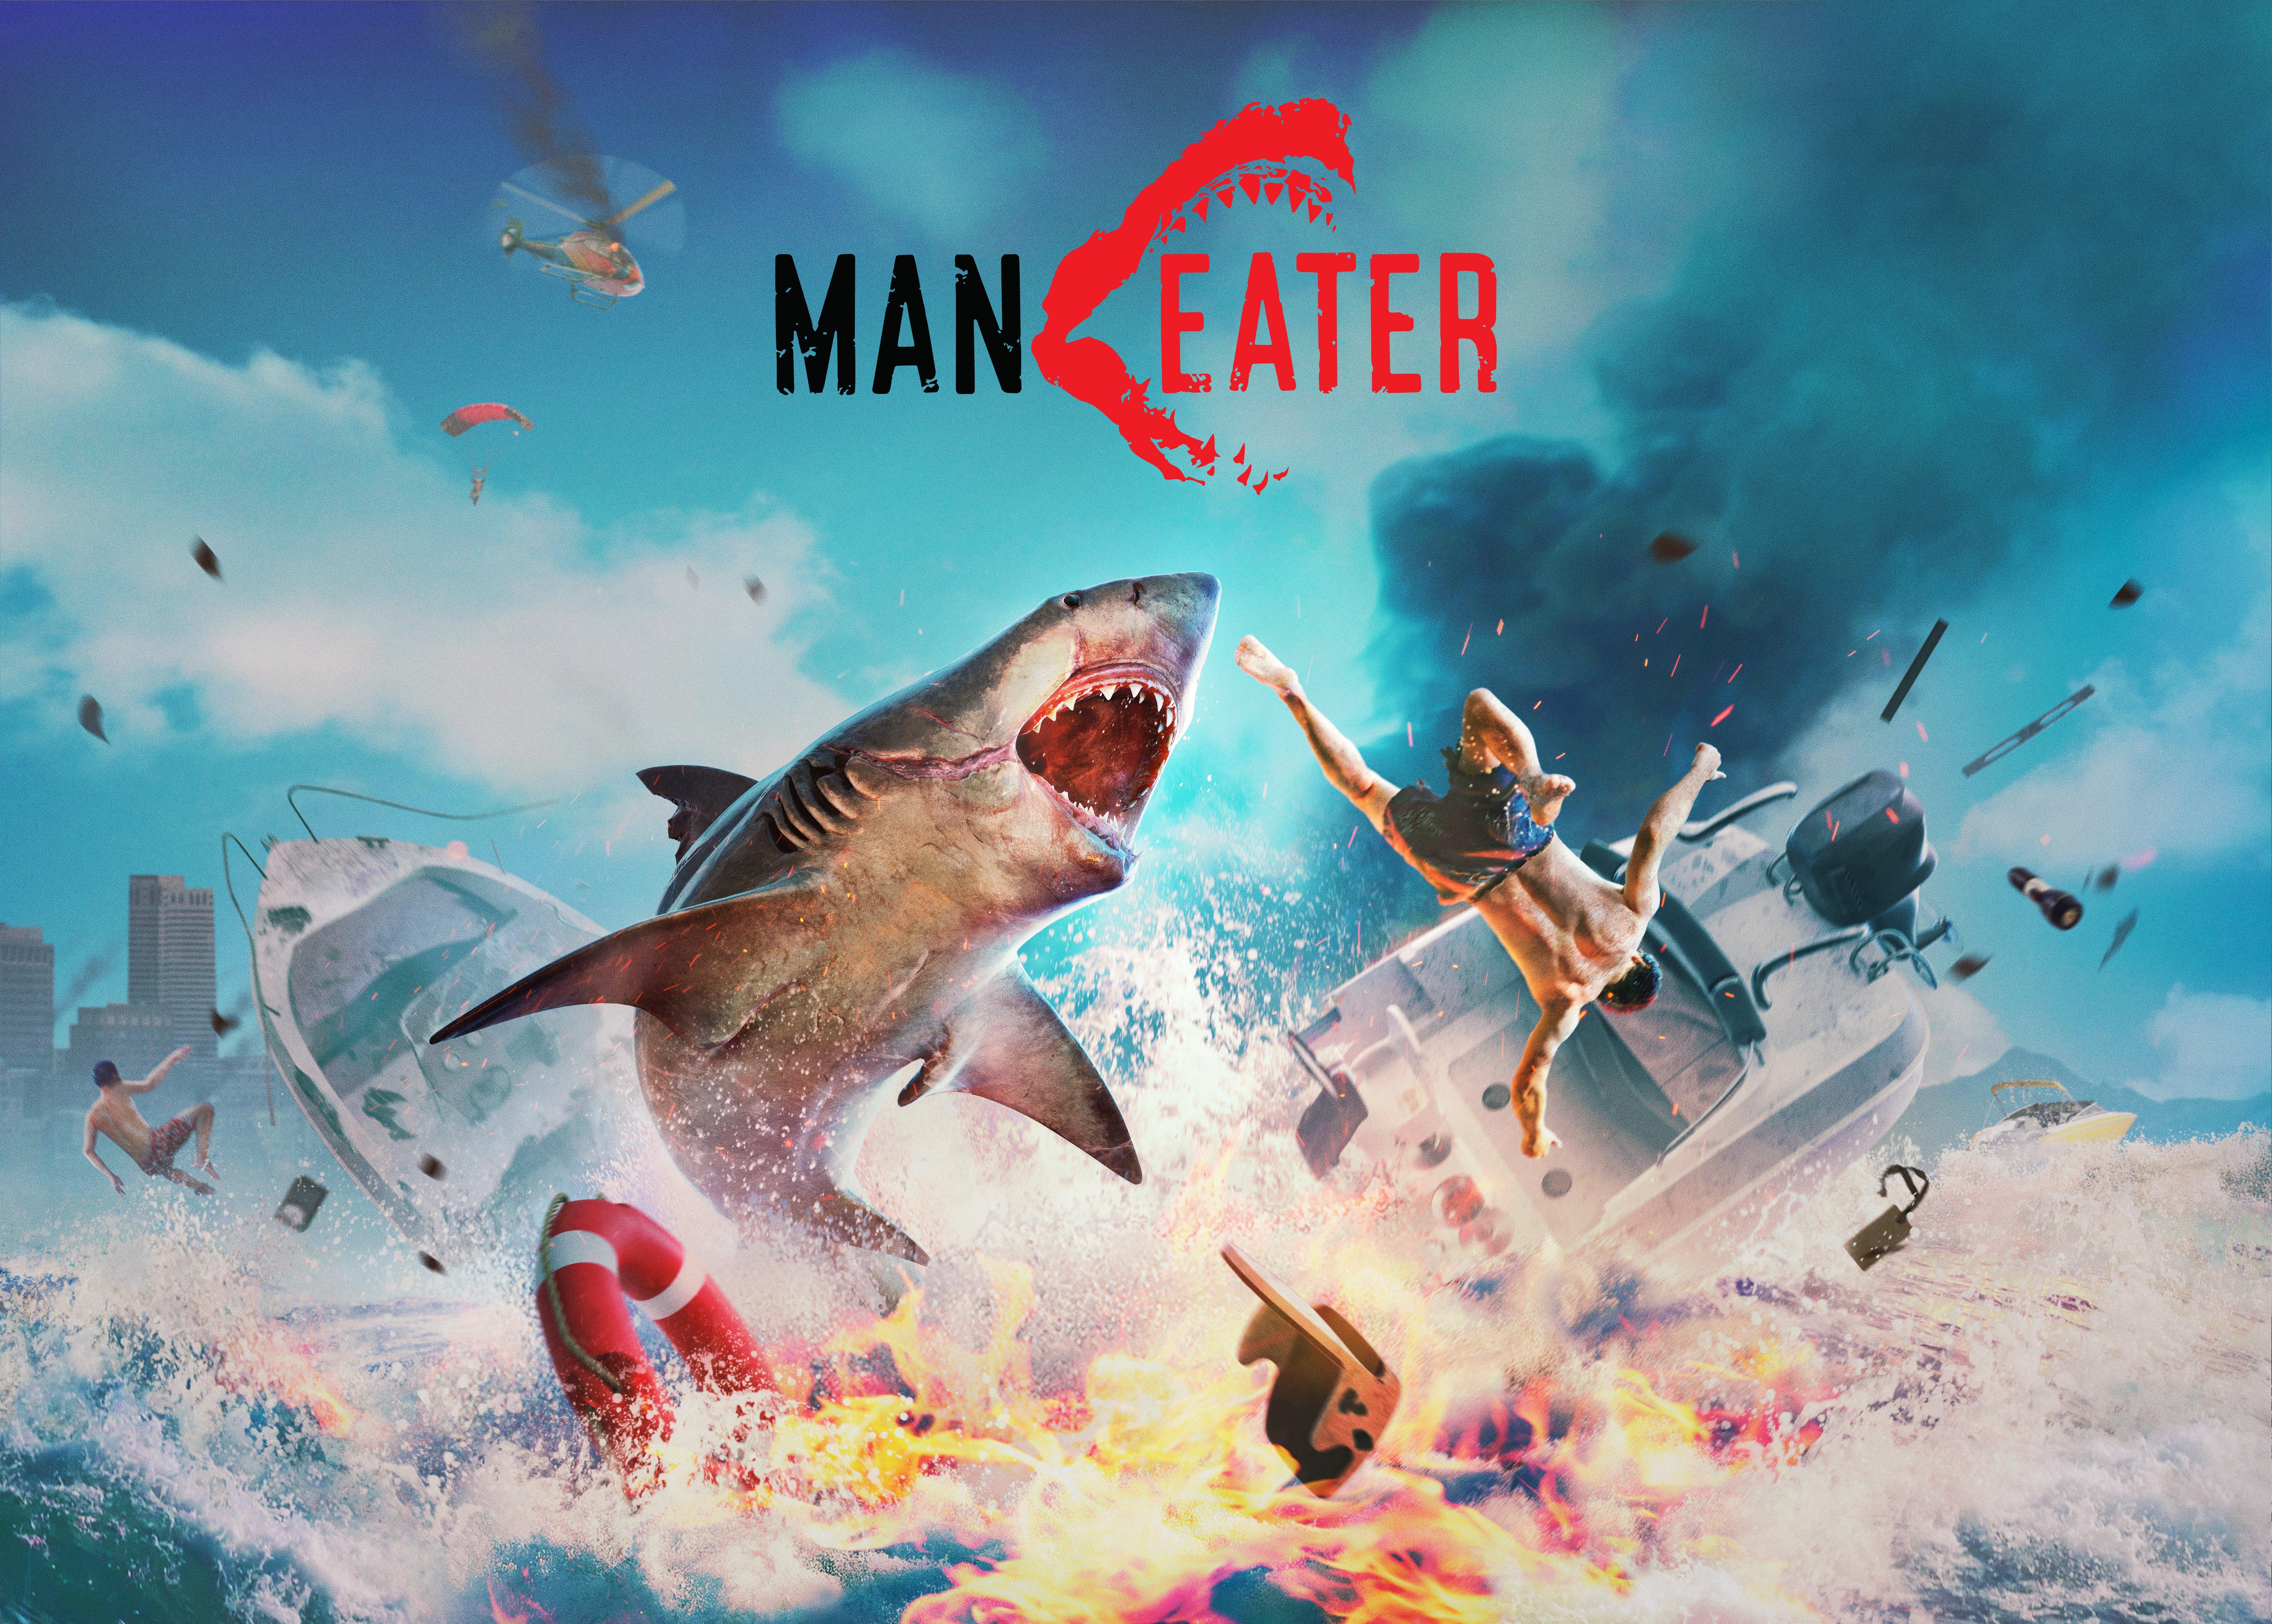 Maneater - PC